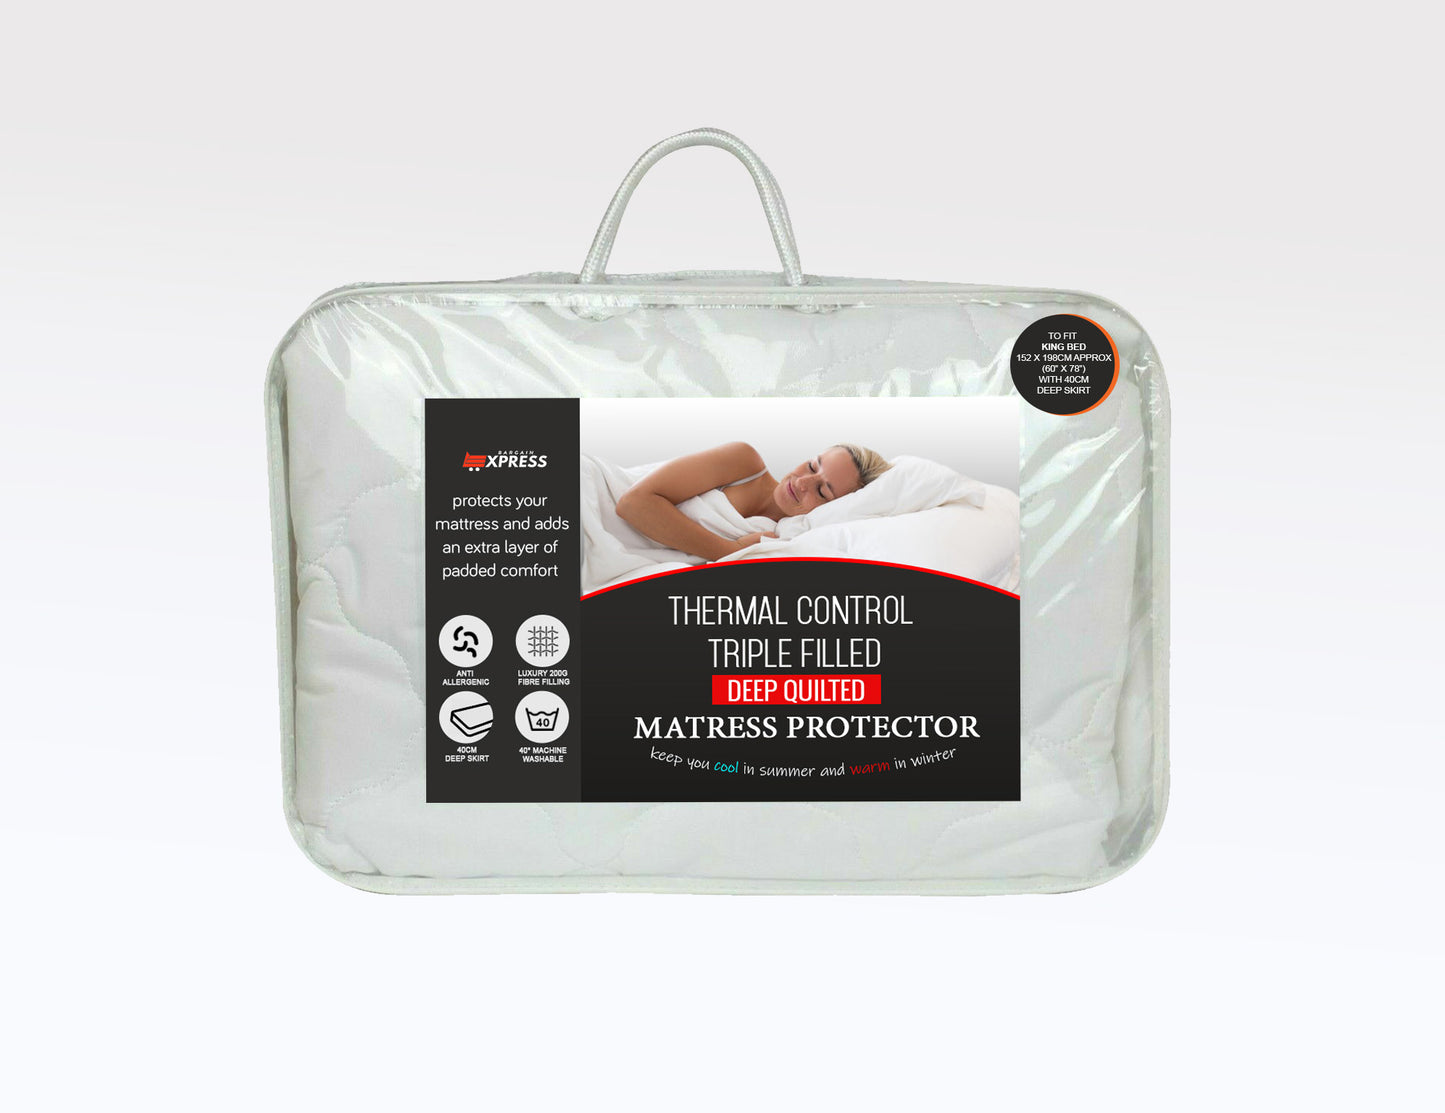 Thermal Control Triple filled Extra Deep Mattress Protector